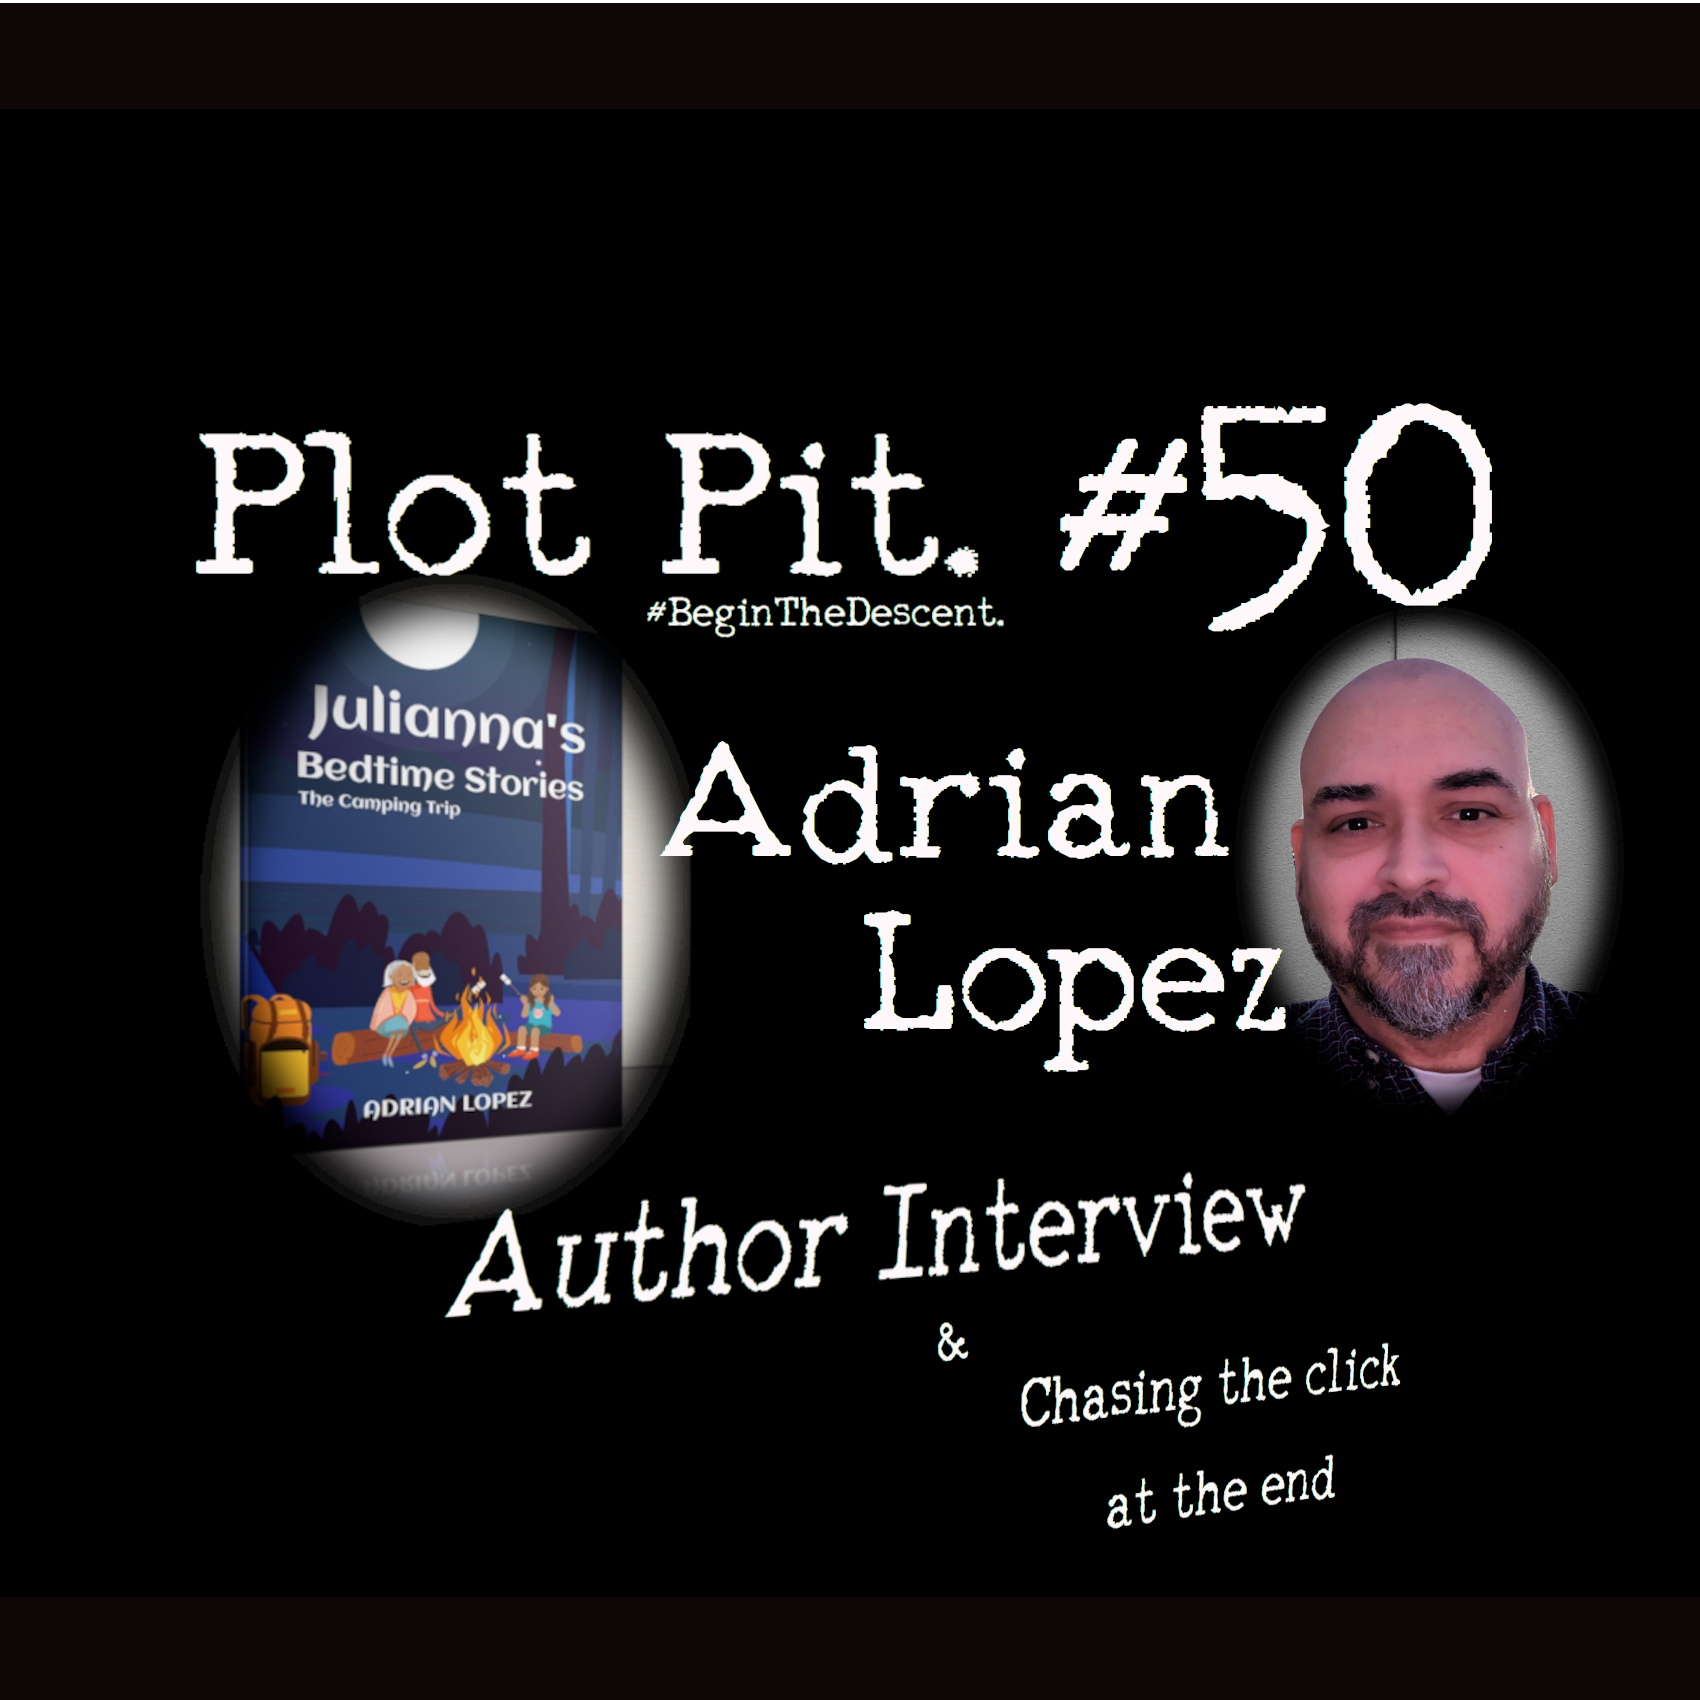 Author Interview with Adrian Lopez - Bonus at End